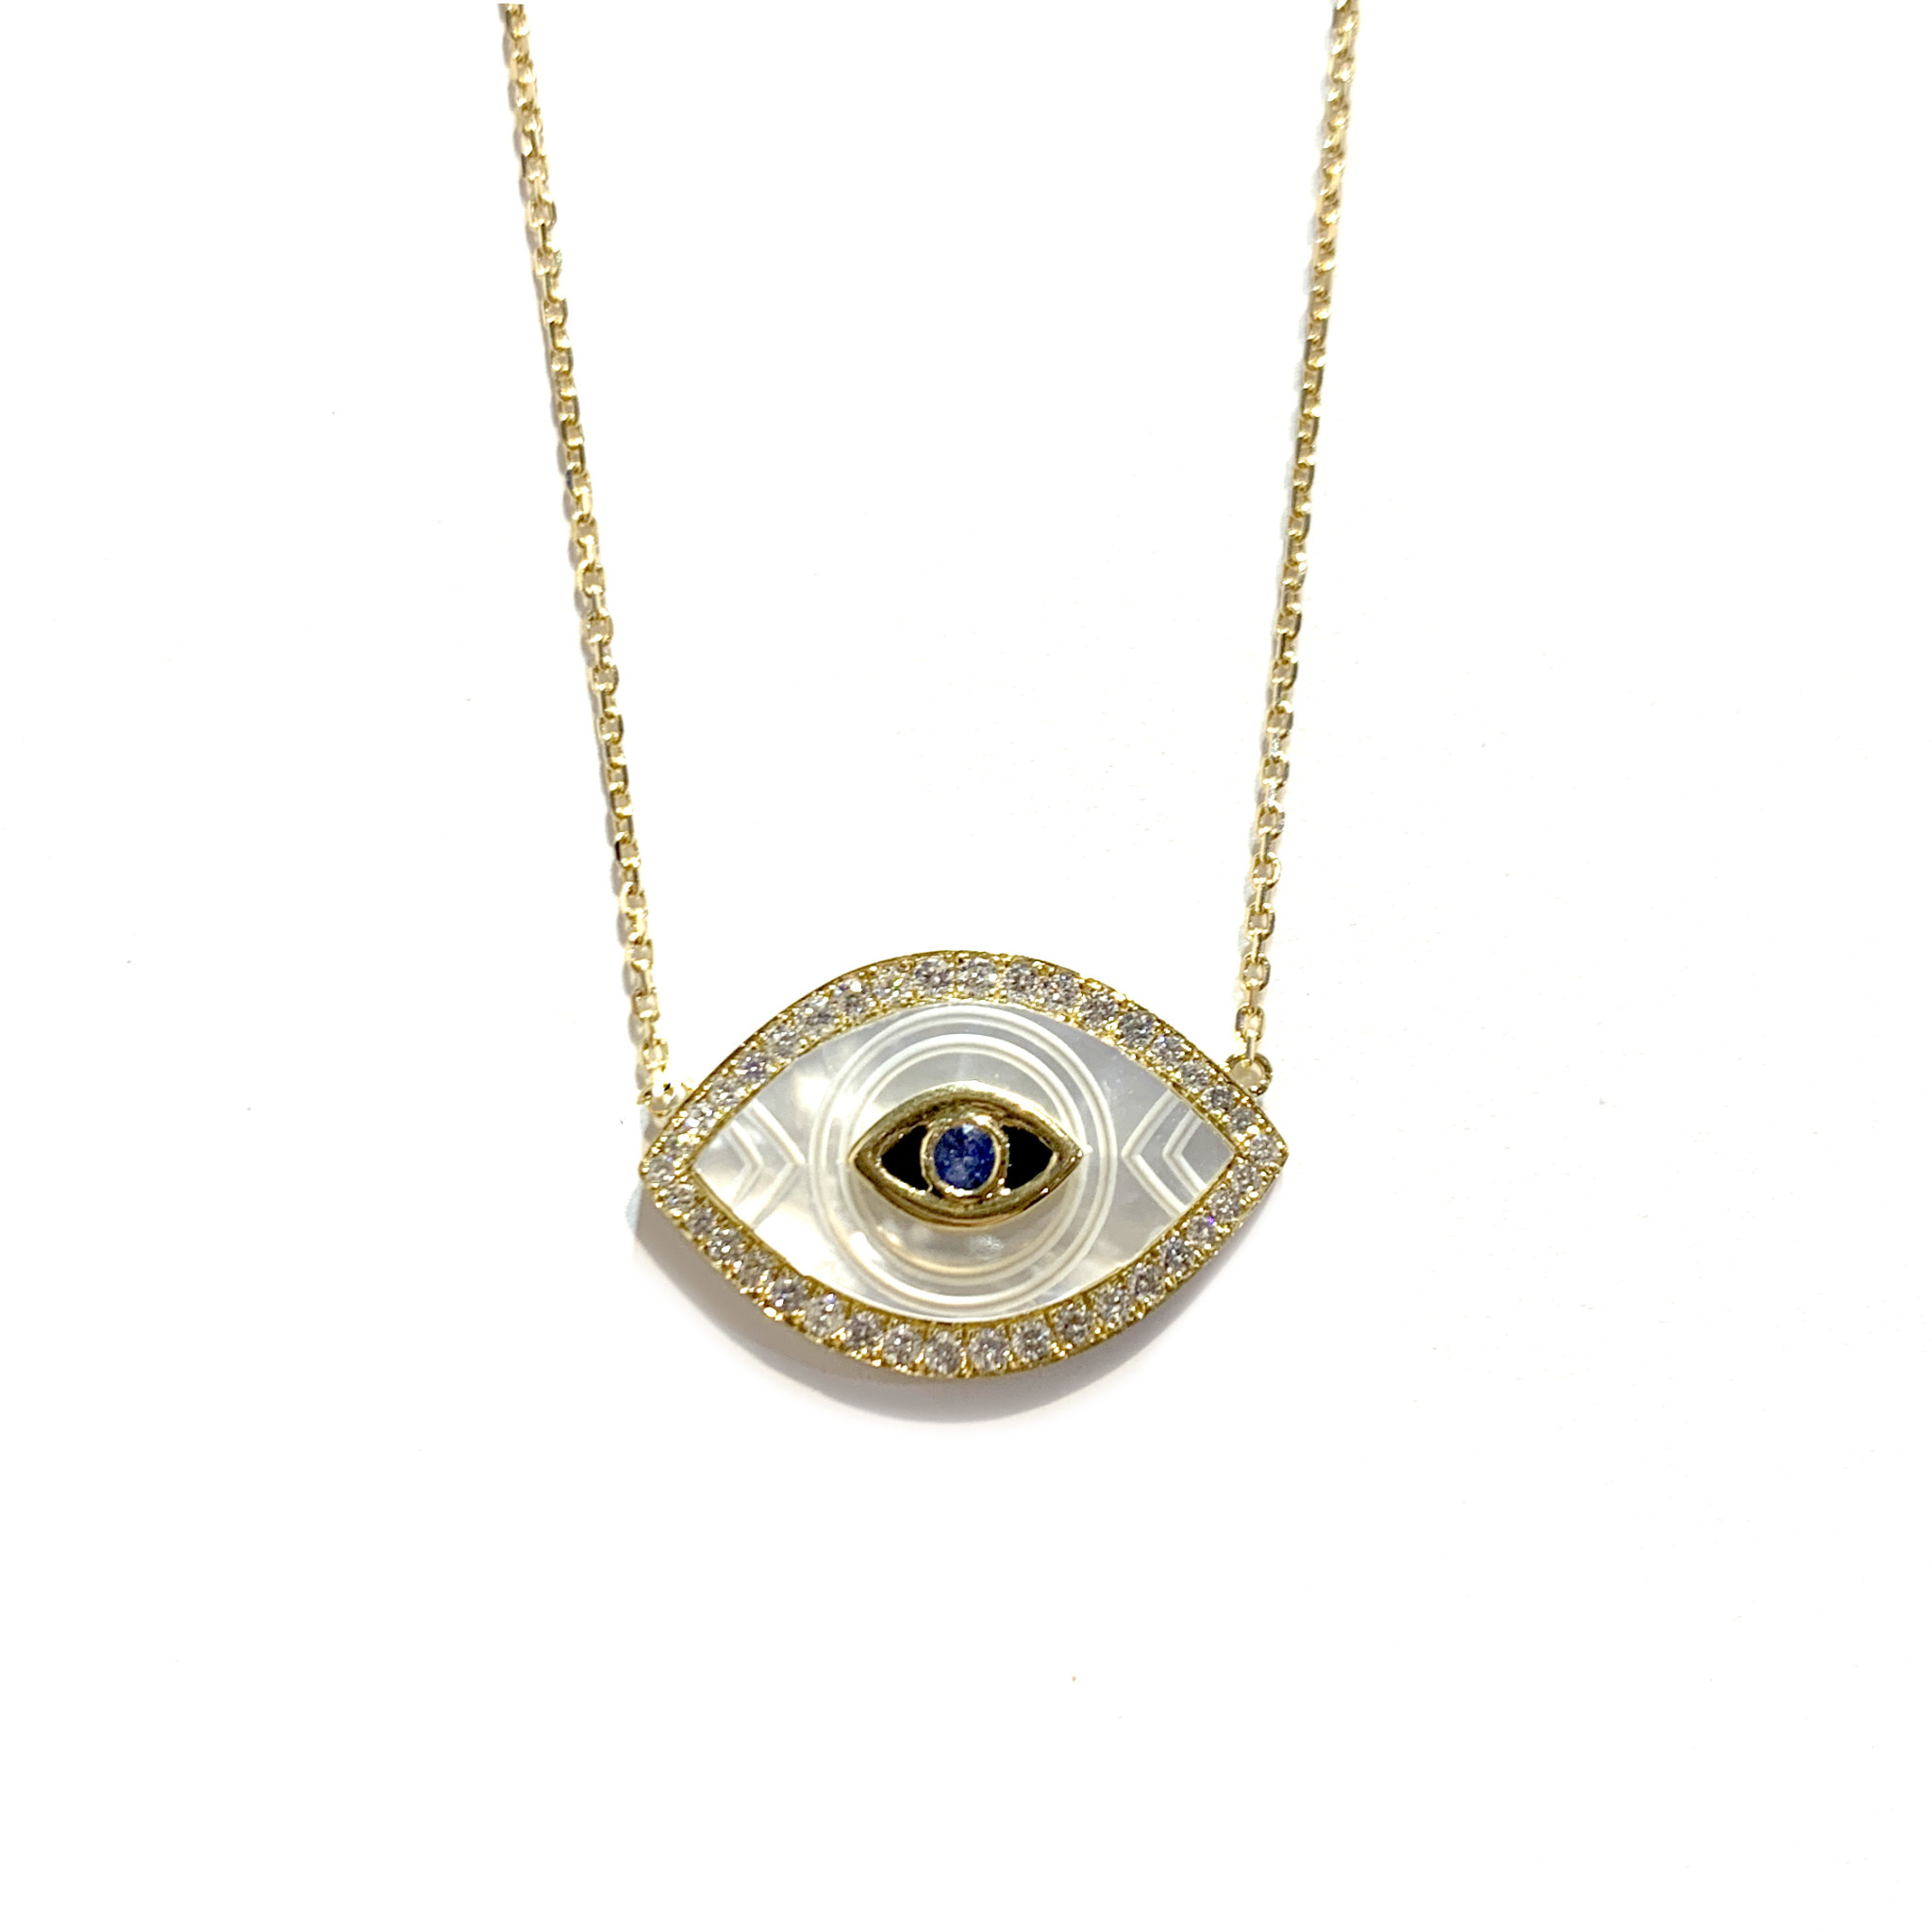 Carved Mother of Pearl and Blue Sapphire Eye Necklace